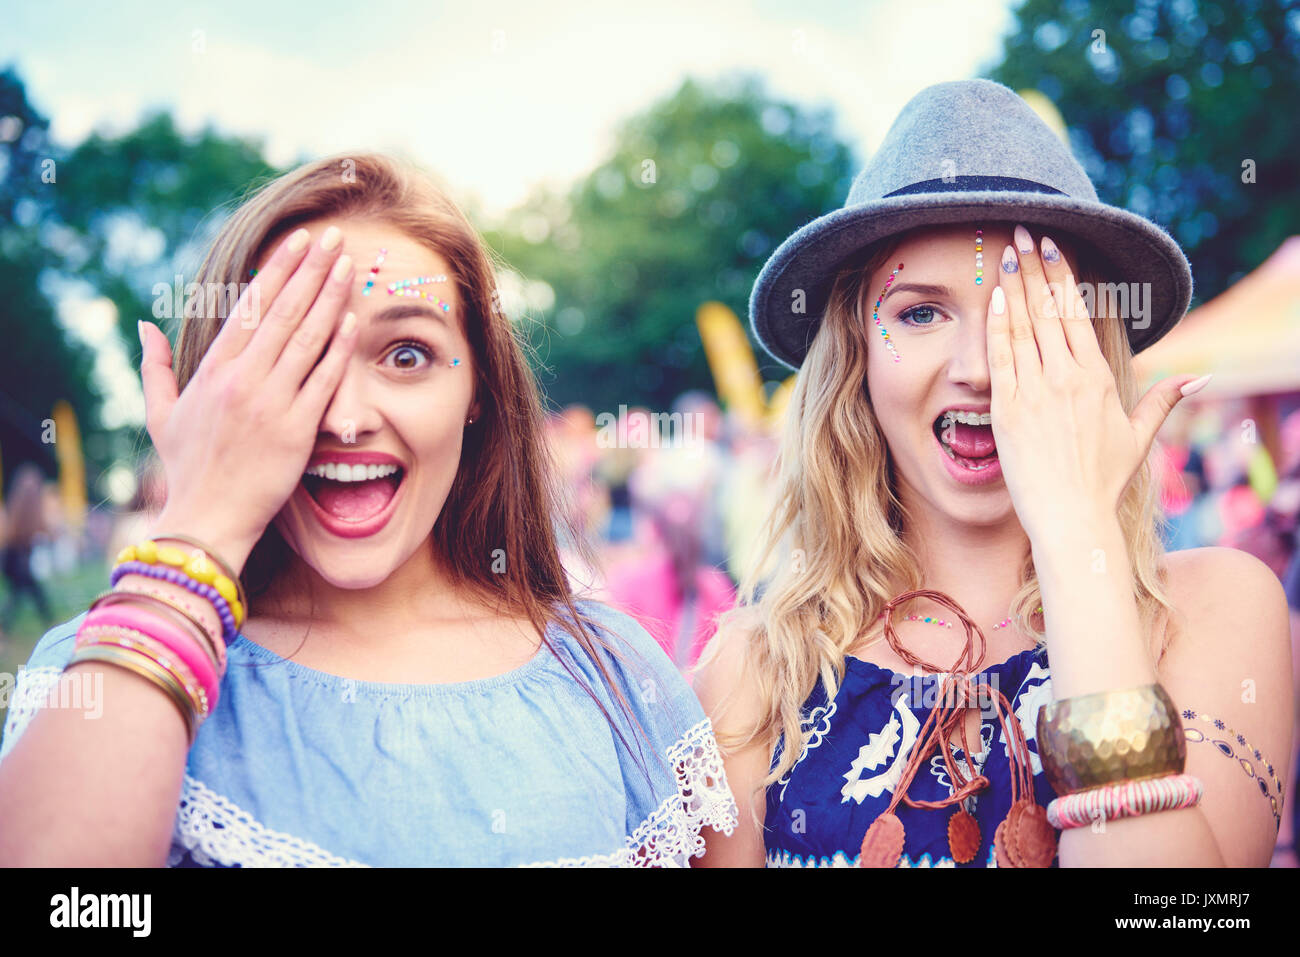 Portrait of two young female friends covering an eye at festival Stock Photo